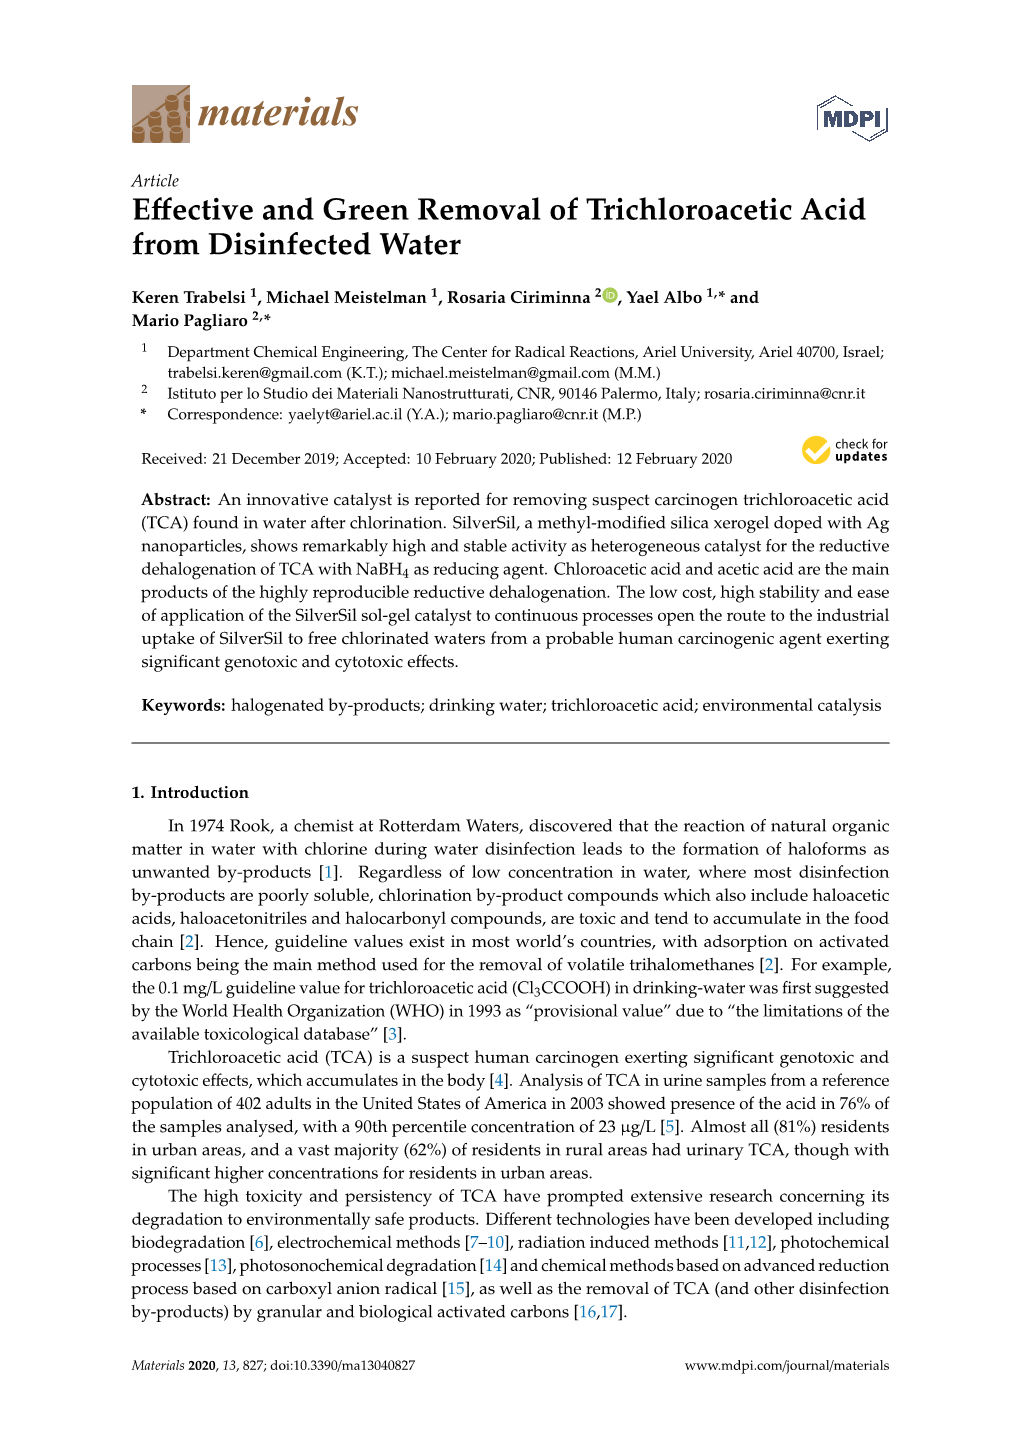 Effective and Green Removal of Trichloroacetic Acid from Disinfected Water